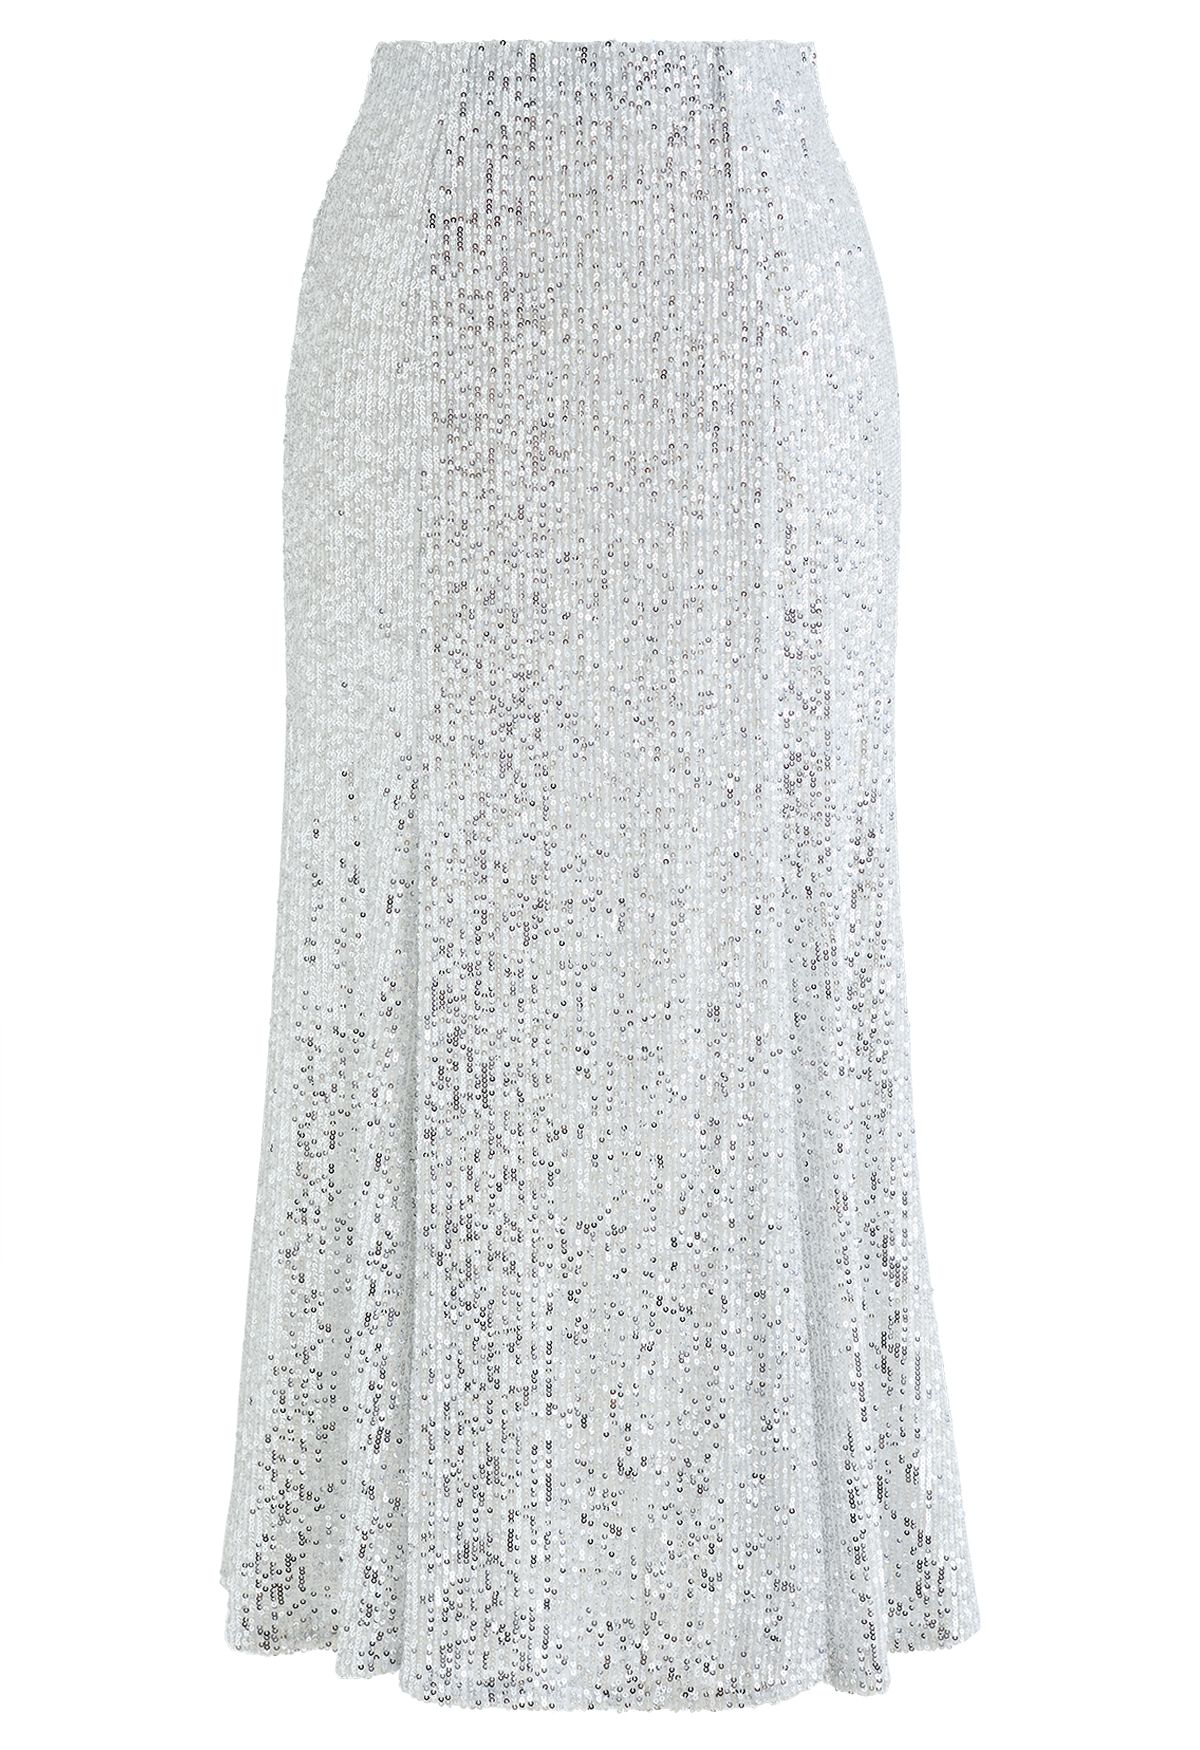 Glitter Sequins Trim Mermaid Midi Skirt in Silver - Retro, Indie and ...